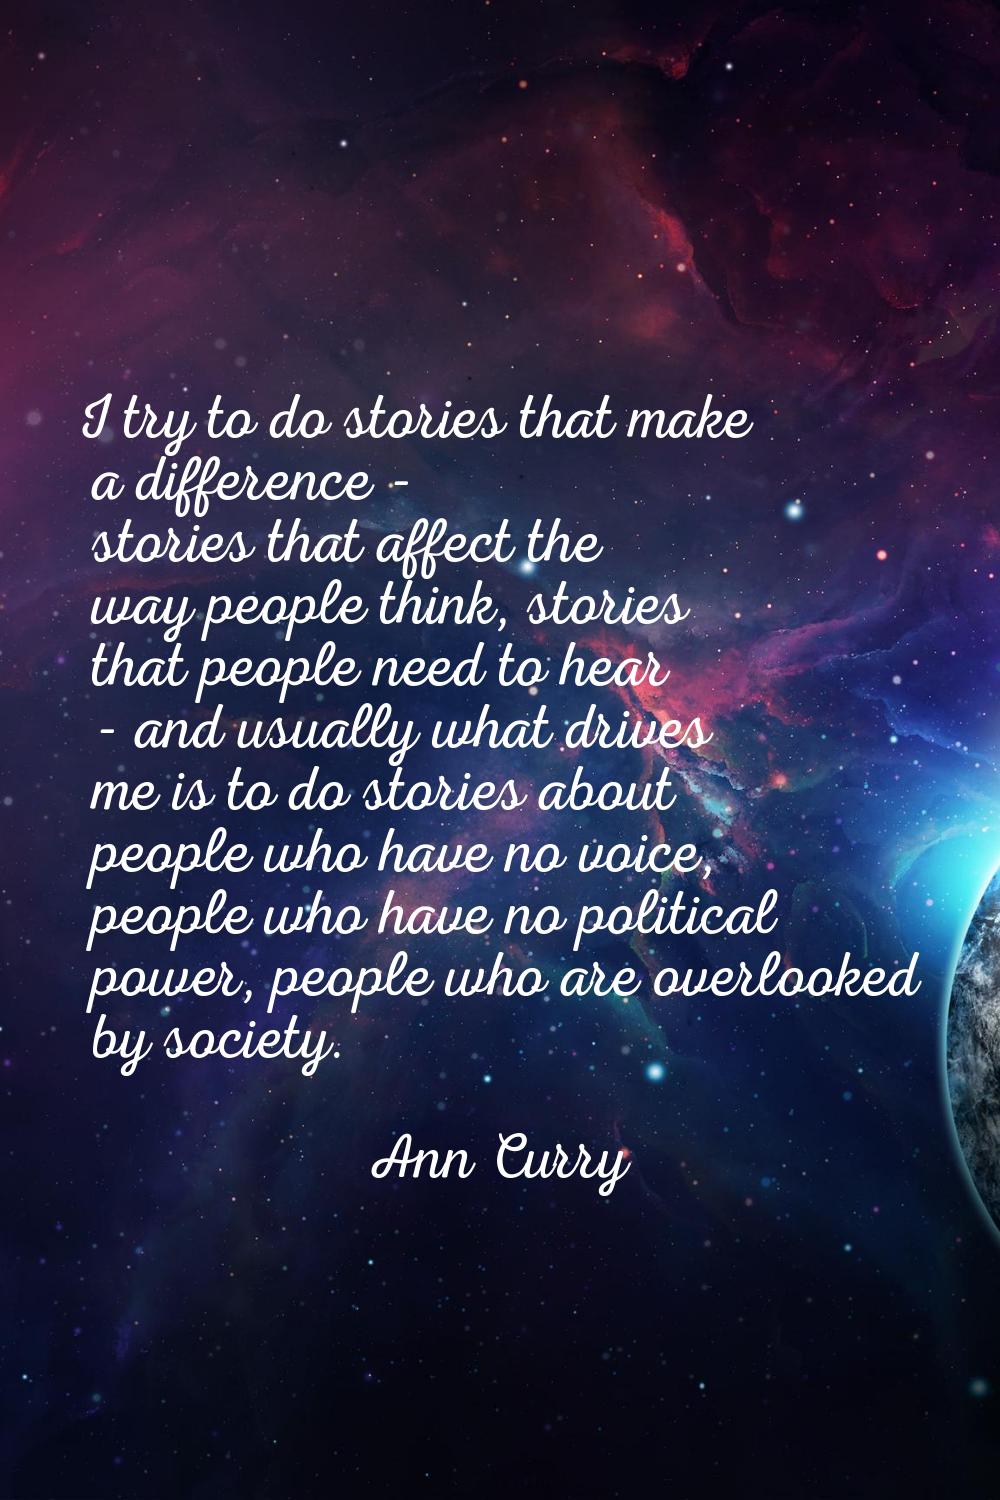 I try to do stories that make a difference - stories that affect the way people think, stories that